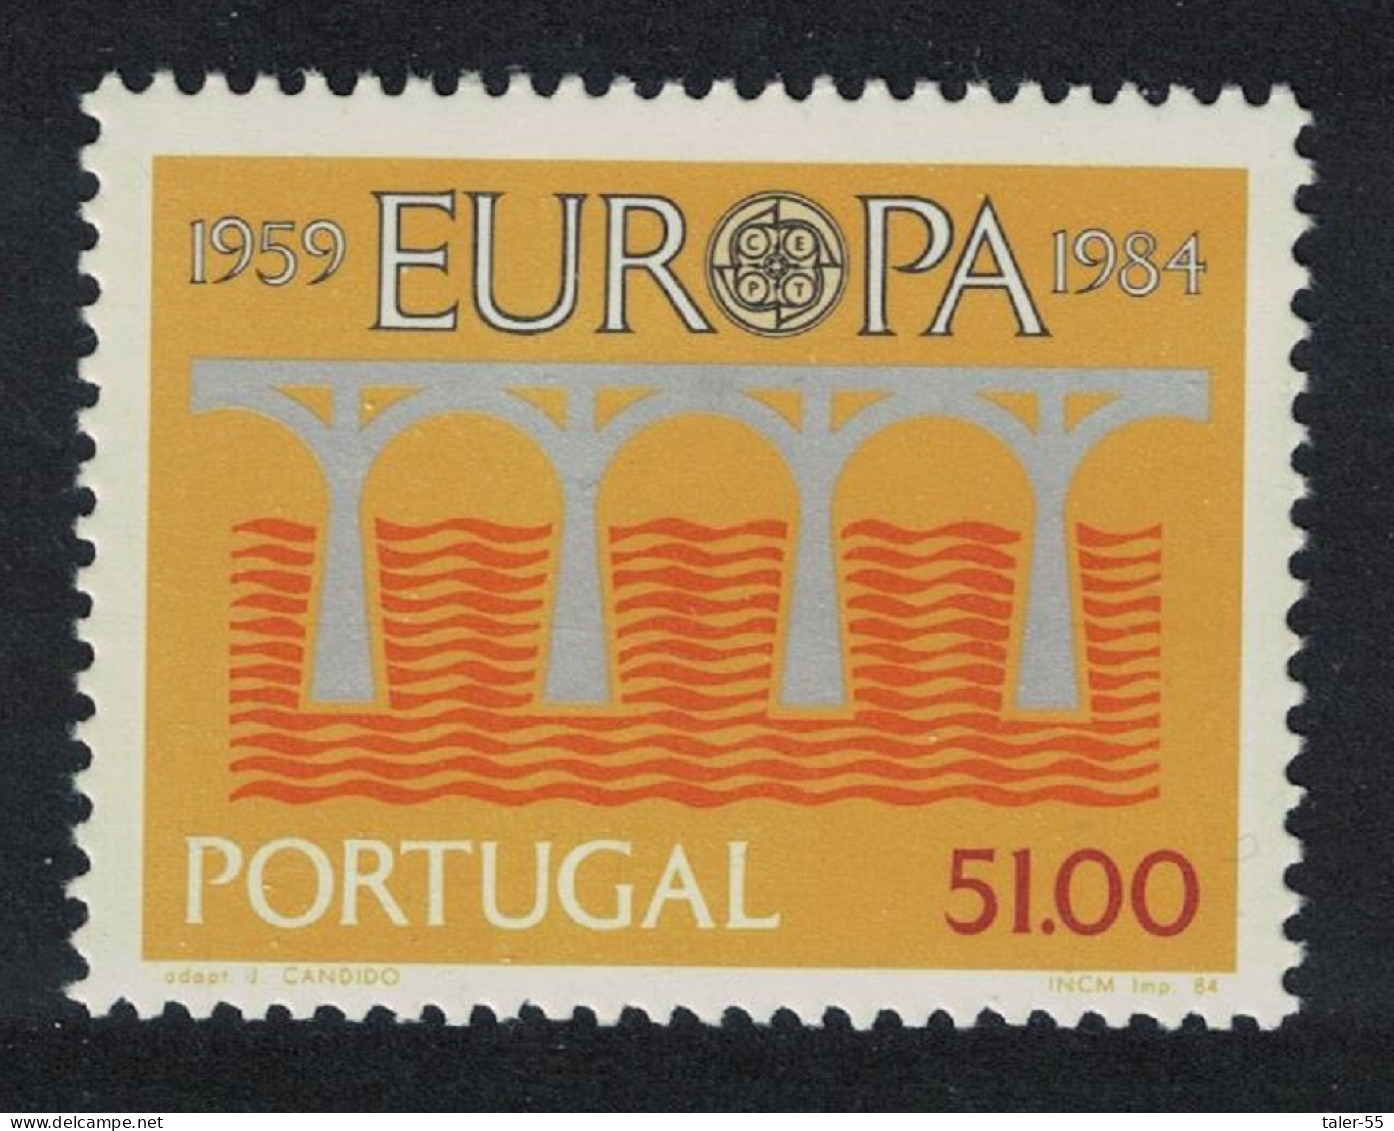 Portugal 25th Anniversary Of CEPT Europa 1984 MNH SG#1958 - Unused Stamps